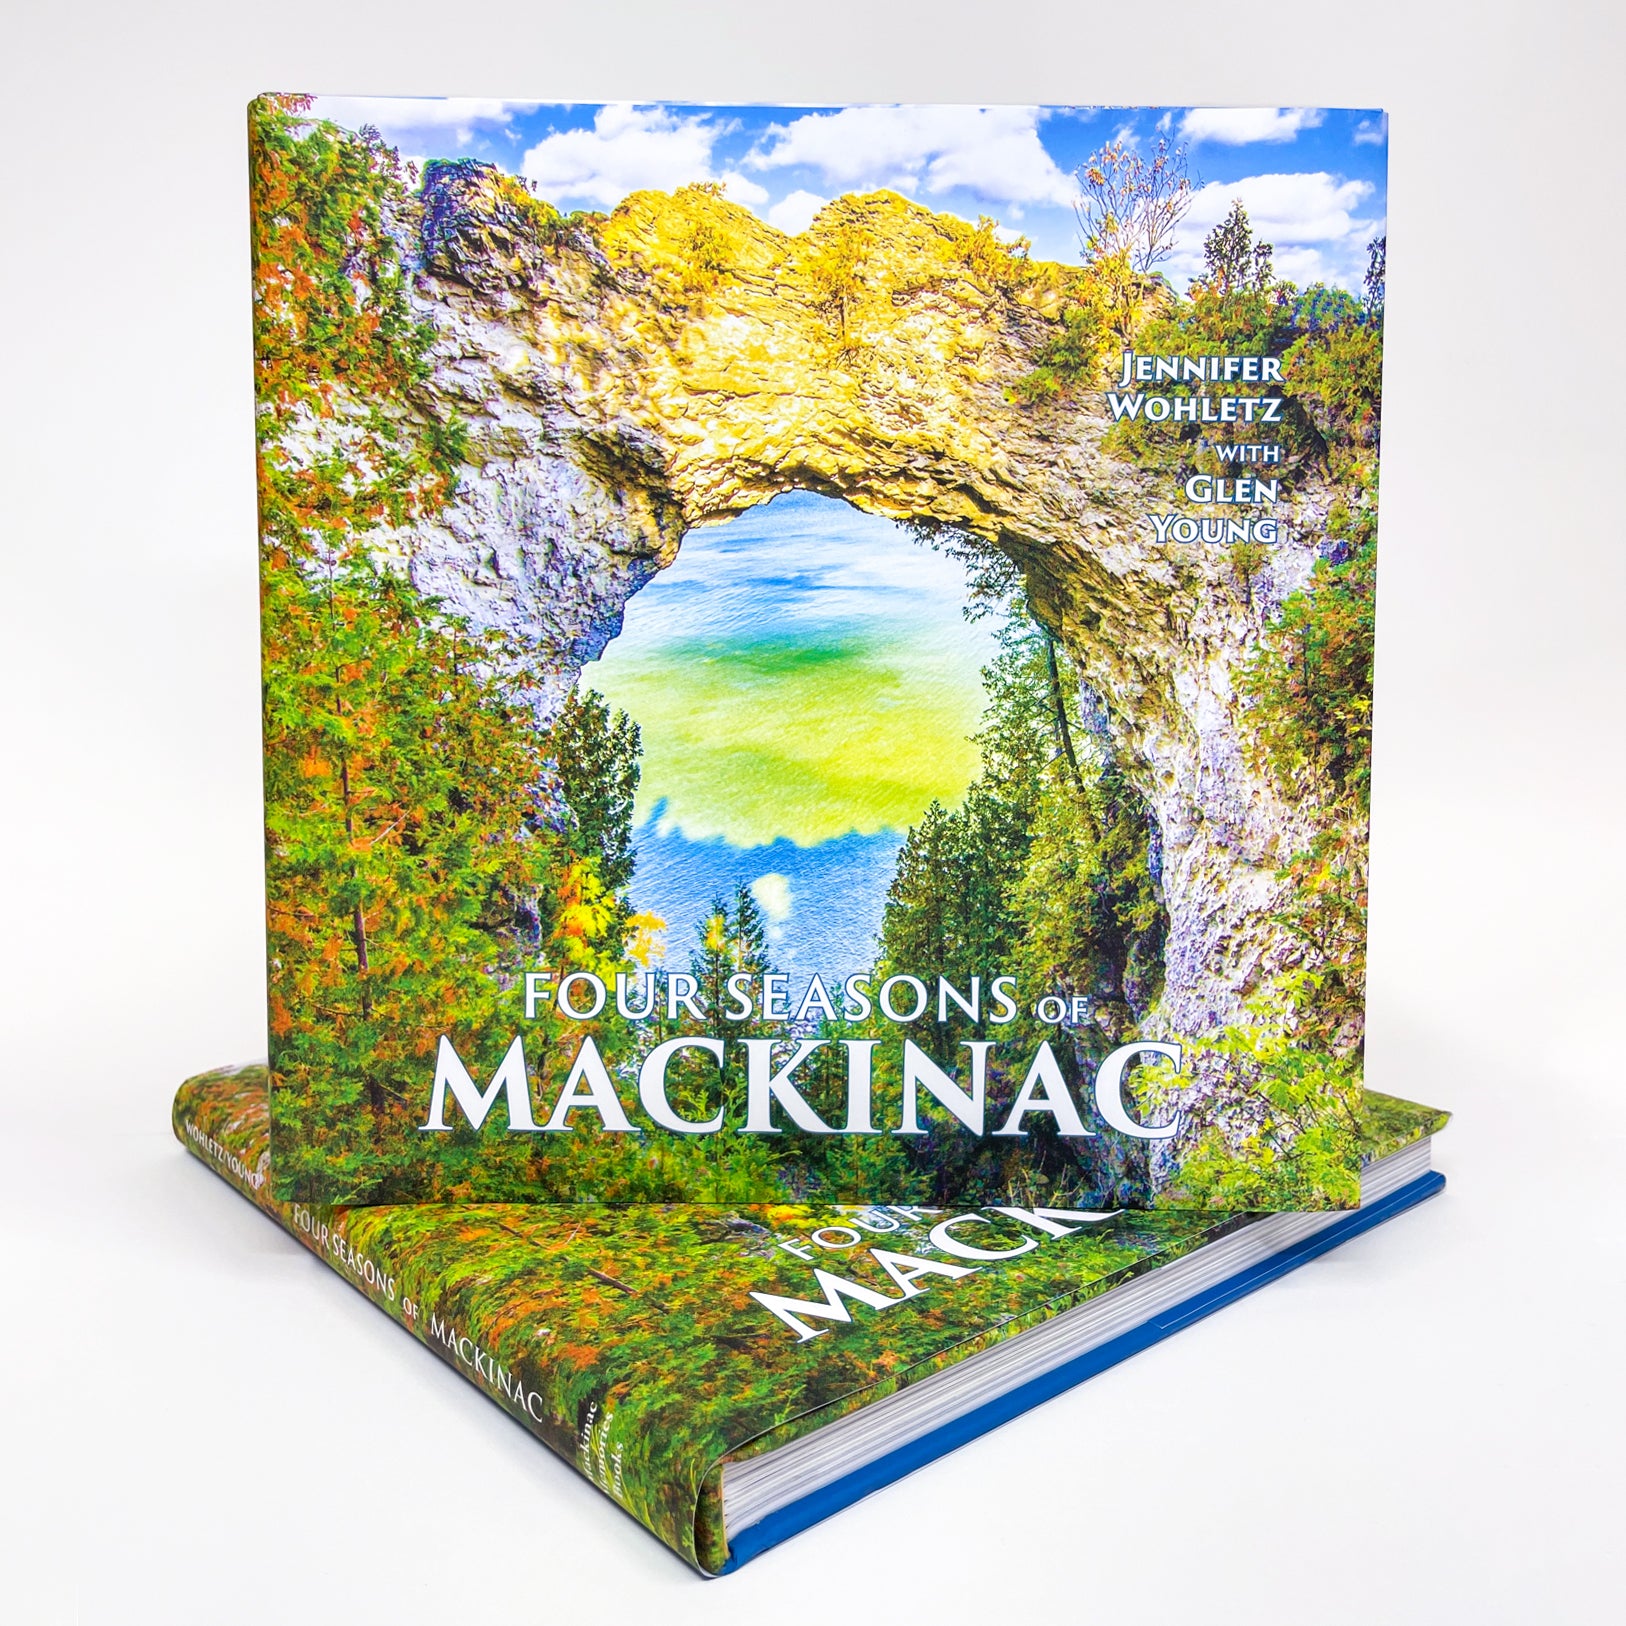 "Four Seasons of Mackinac" coffee table book by Jennifer Wohletz and Glen Young.